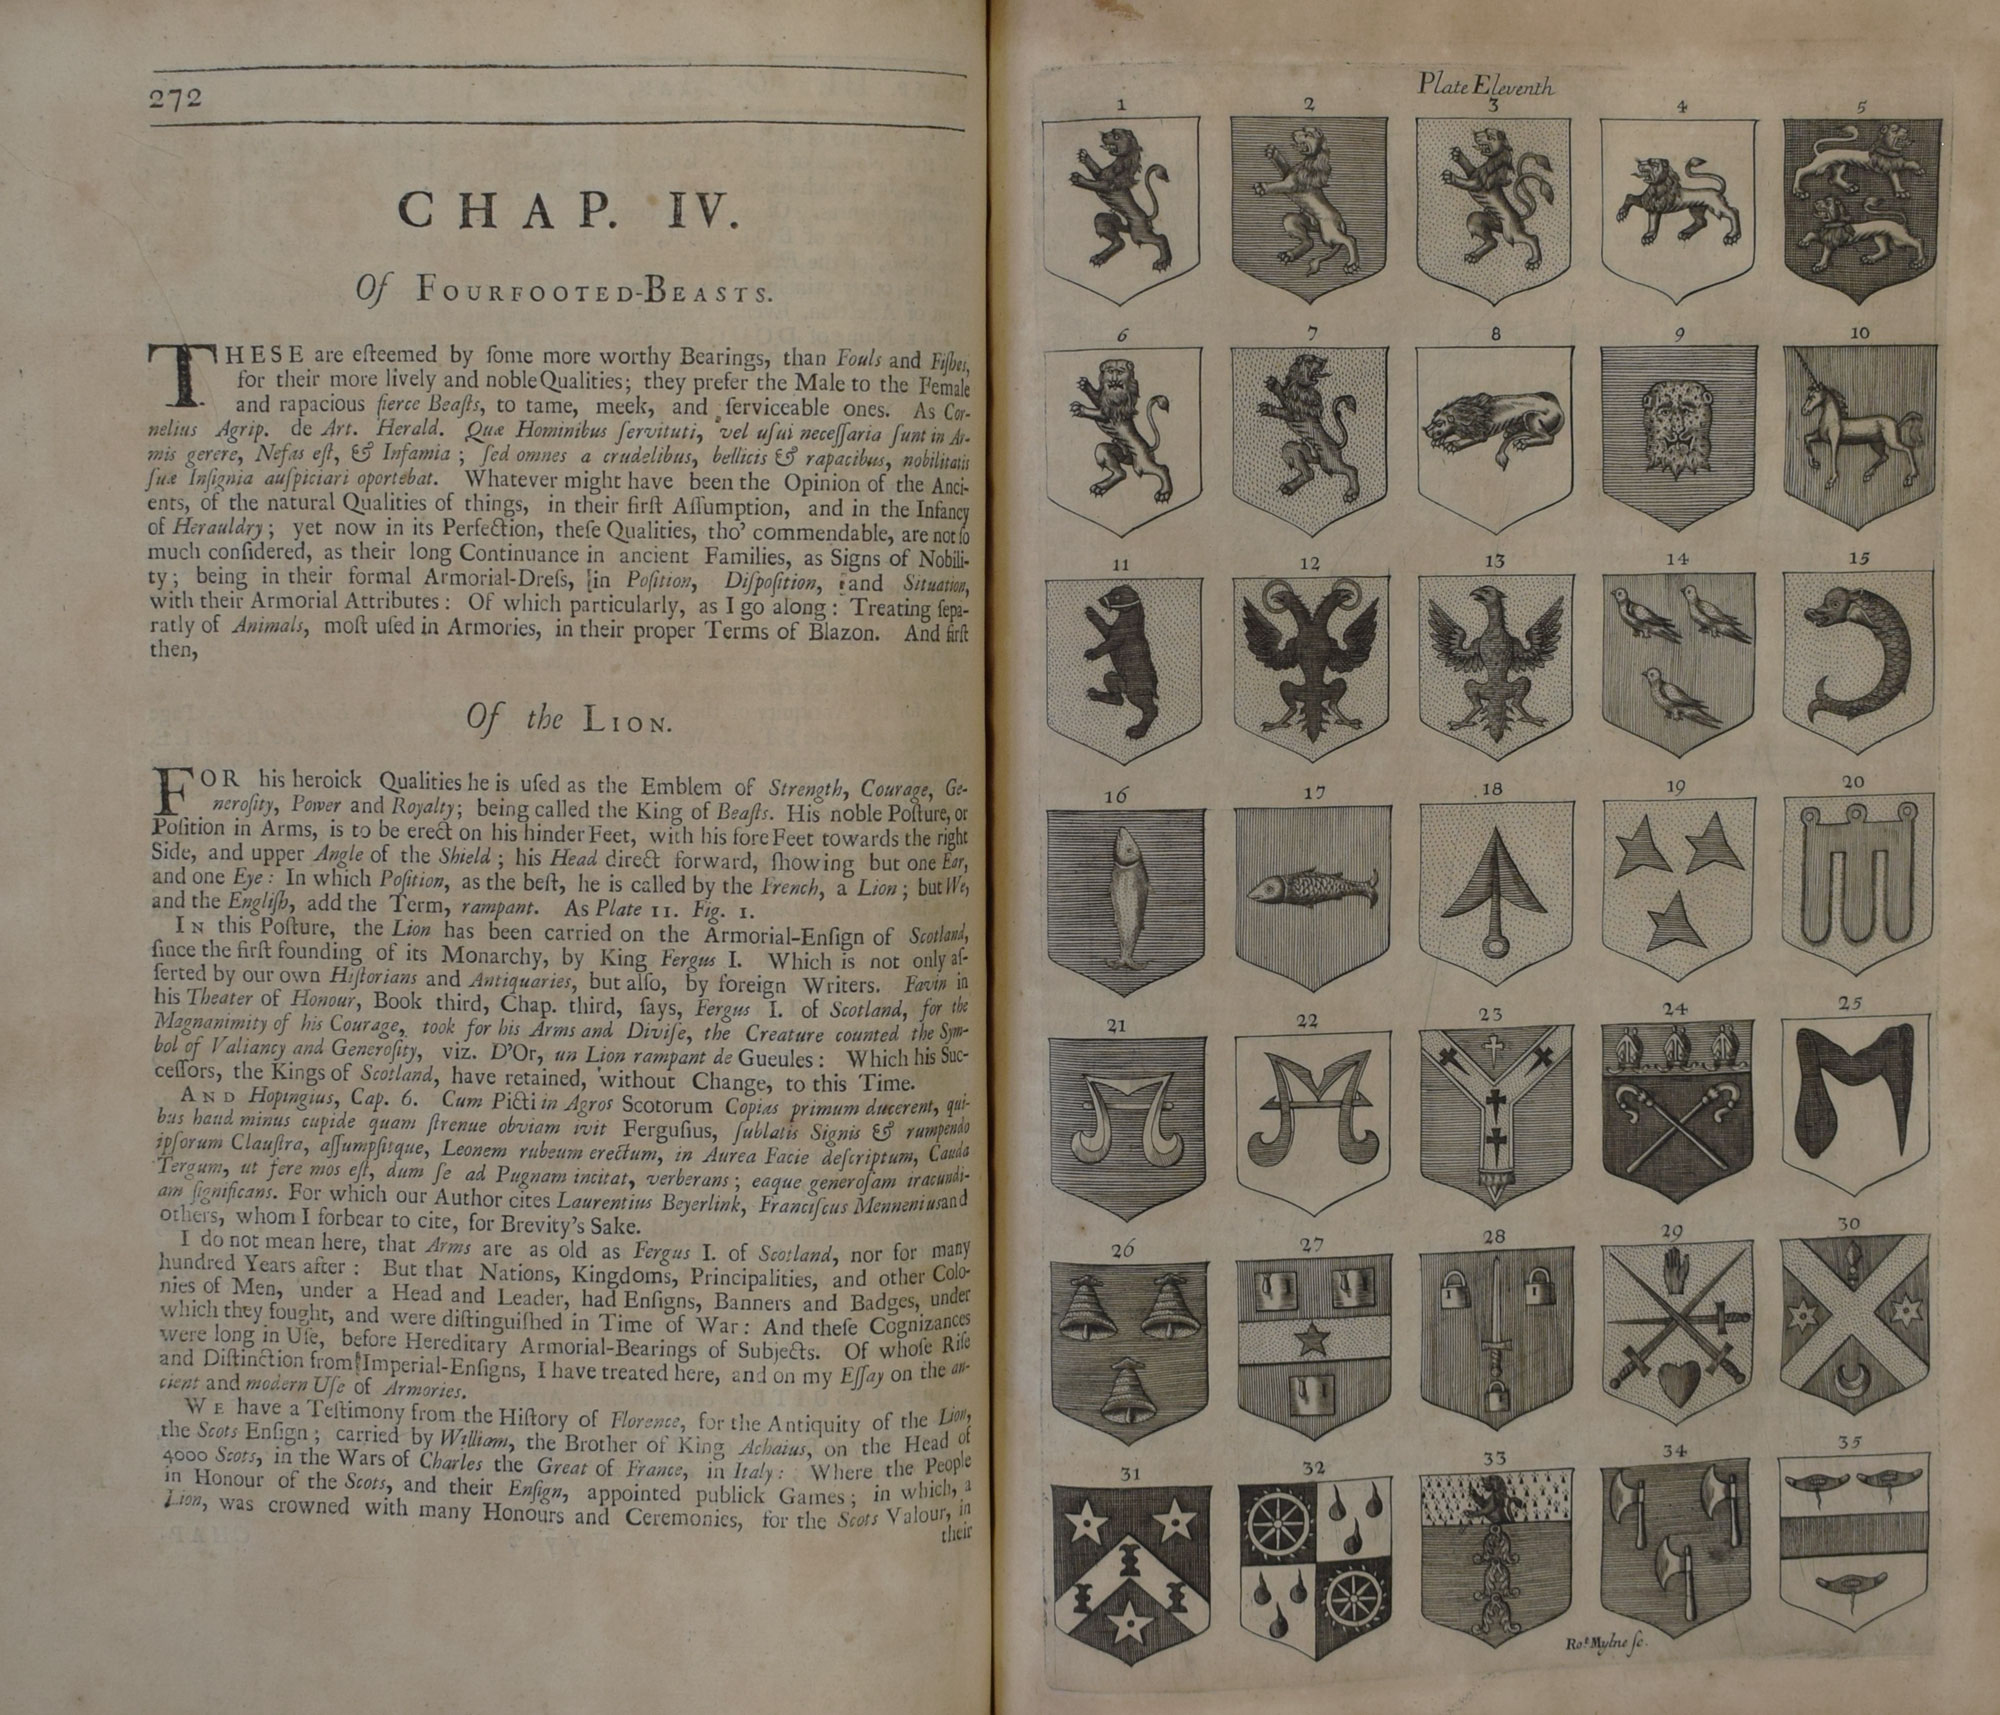 A System of Heraldry Speculative and Practical: with the True Art of Blazon, according to the Most Approved Heralds in Europe. Parts 1 & 2 in one Volume.